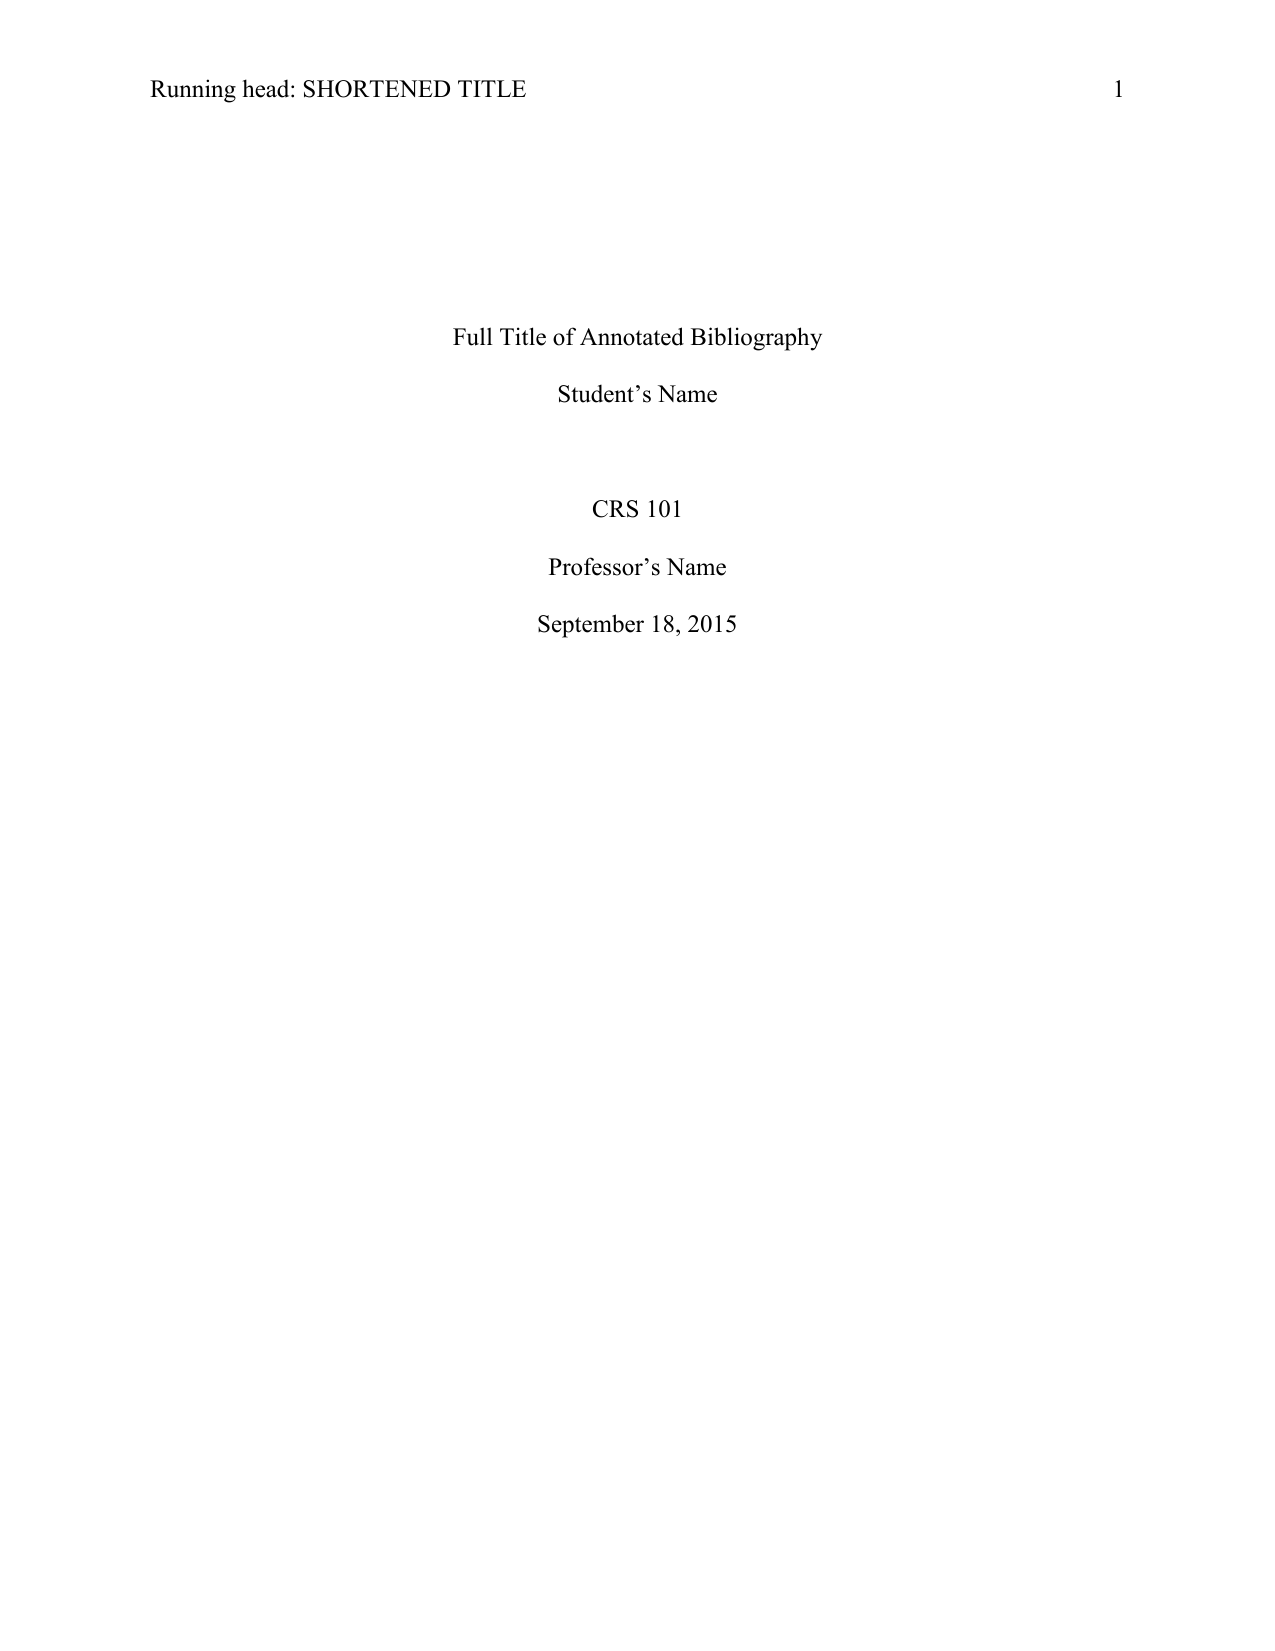 Check my essay: Annotated bibliography title page